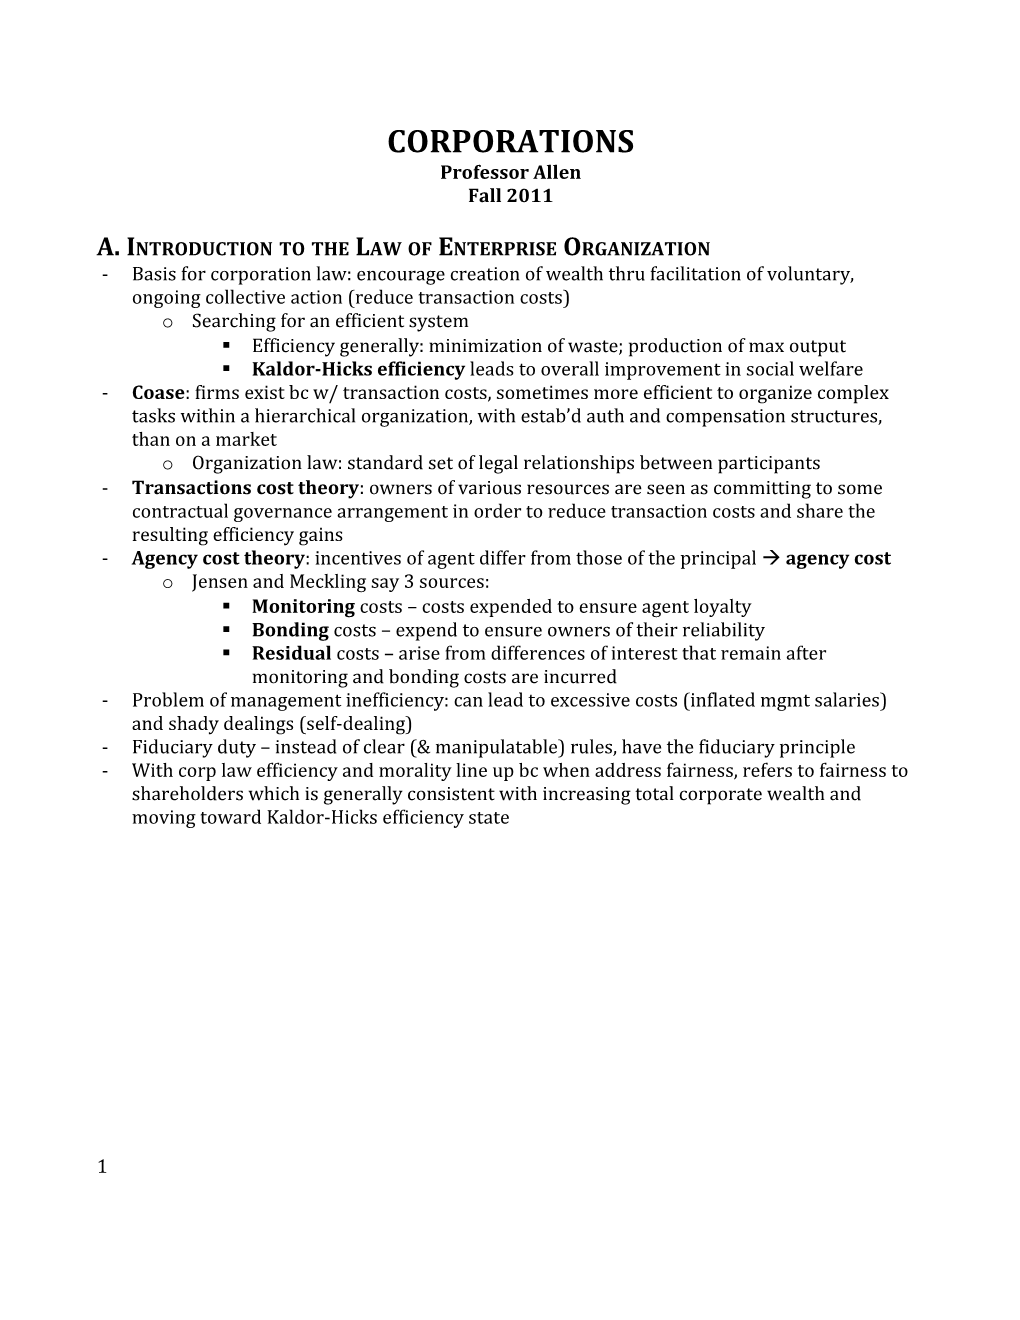 A. Introduction to the Law of Enterprise Organization